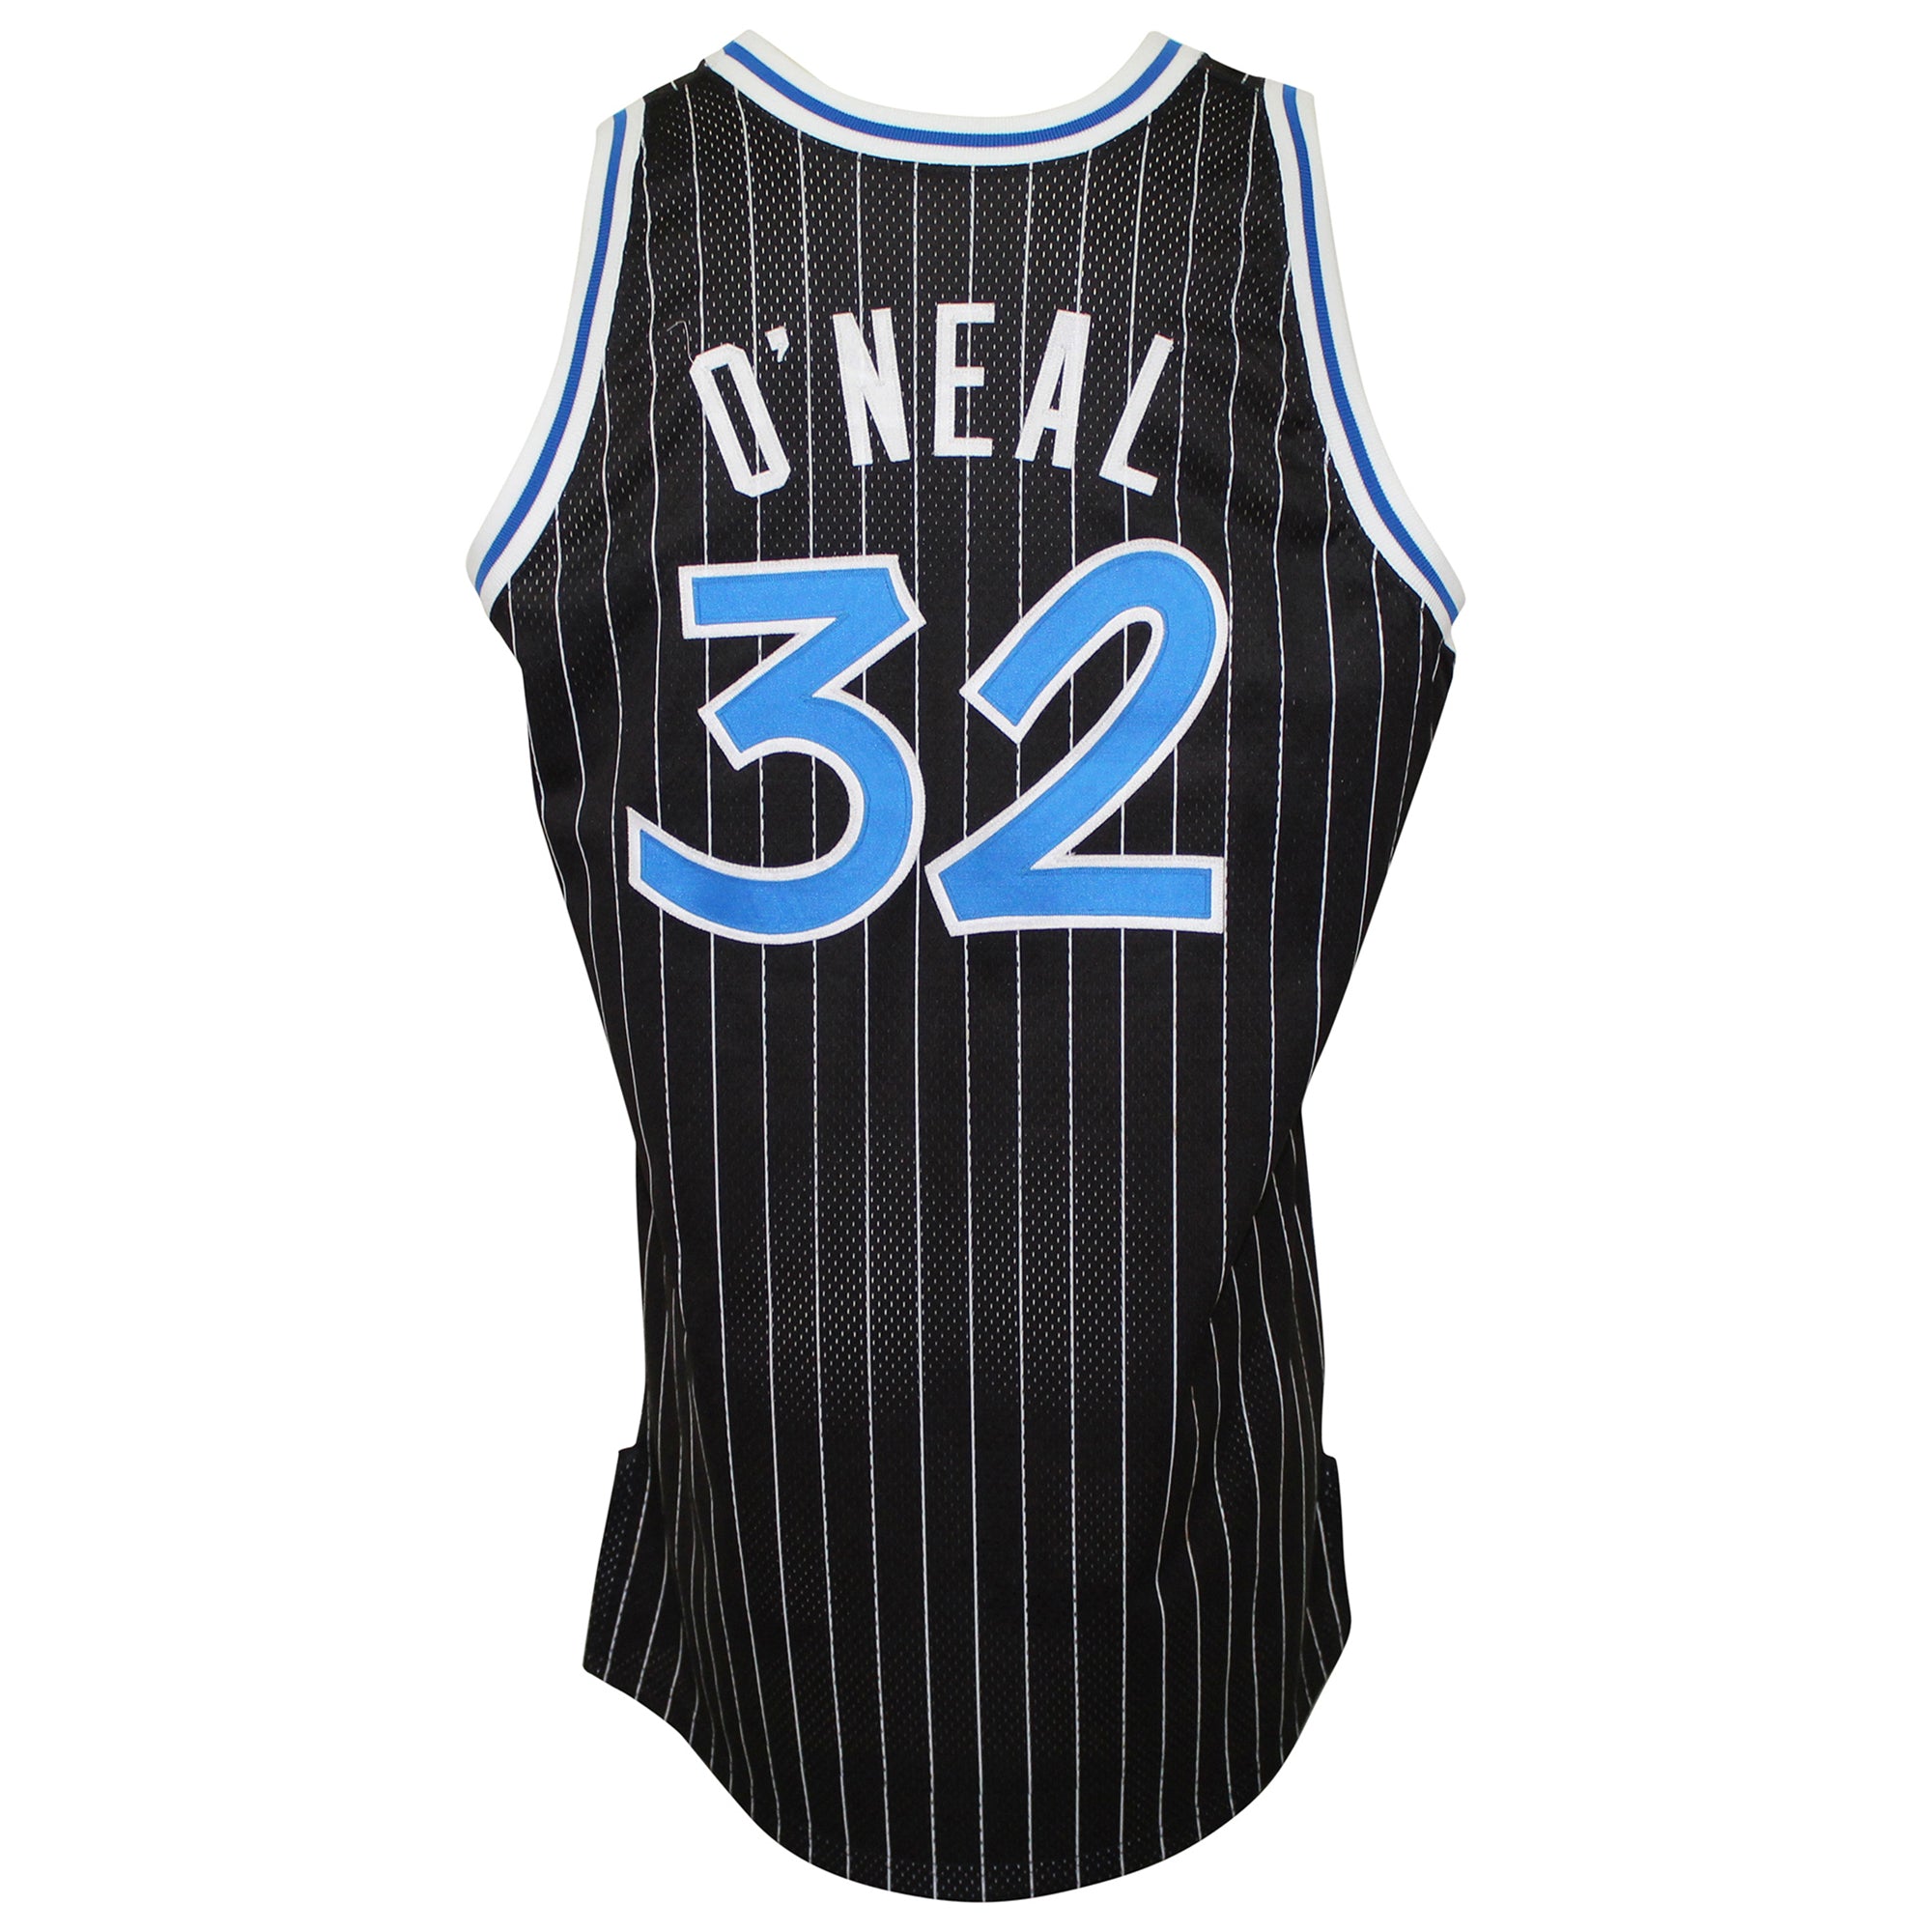 Shaquille O'Neal 1992-93 Game Worn Jersey